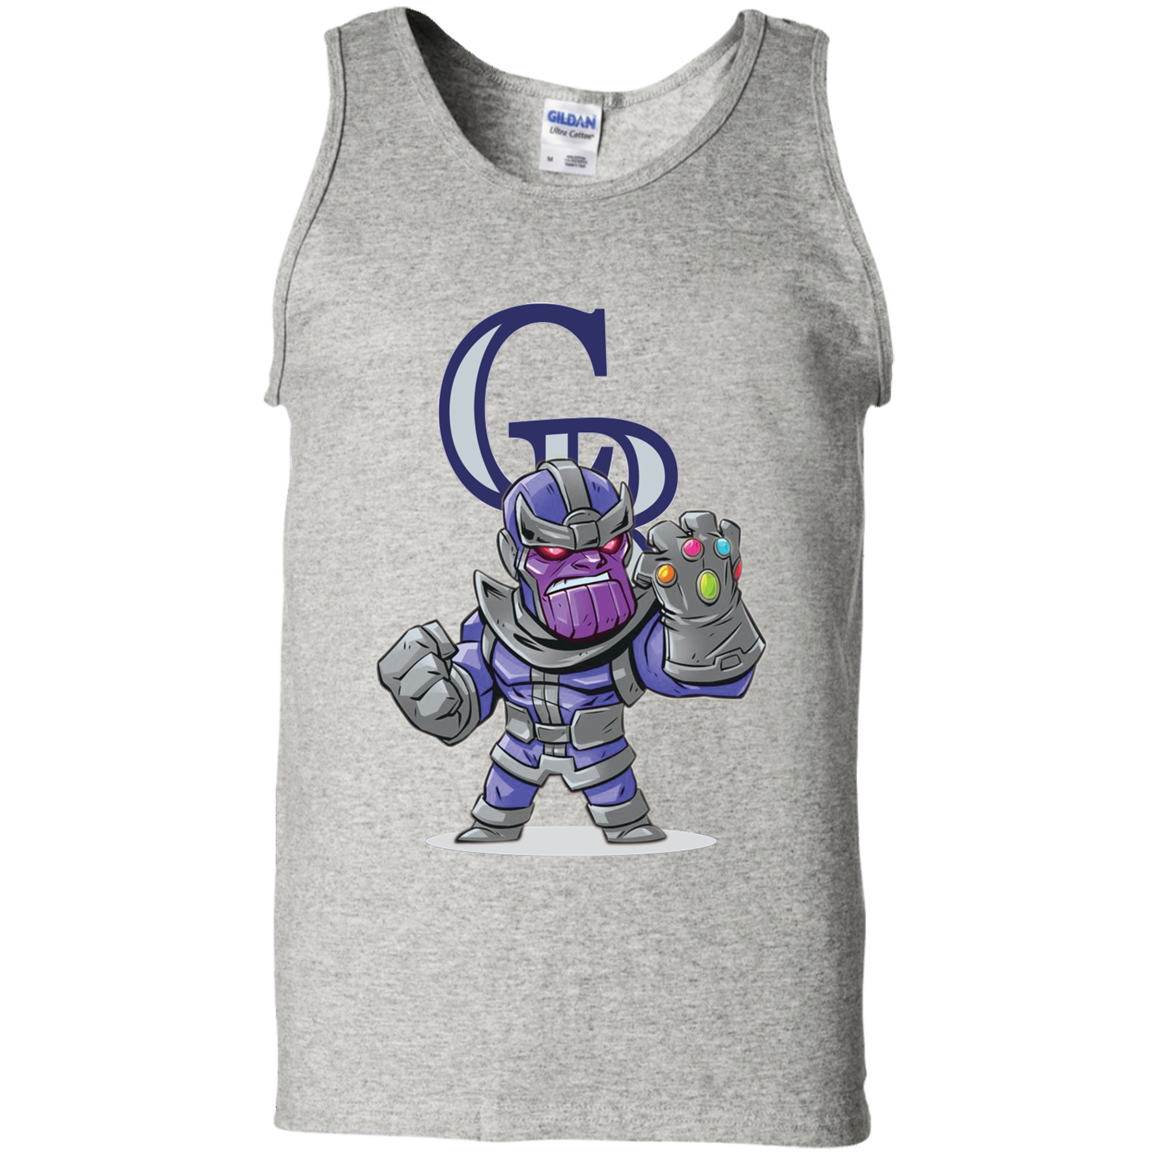 Shirt For Thanos And Colorado Rockies Fans Shirts